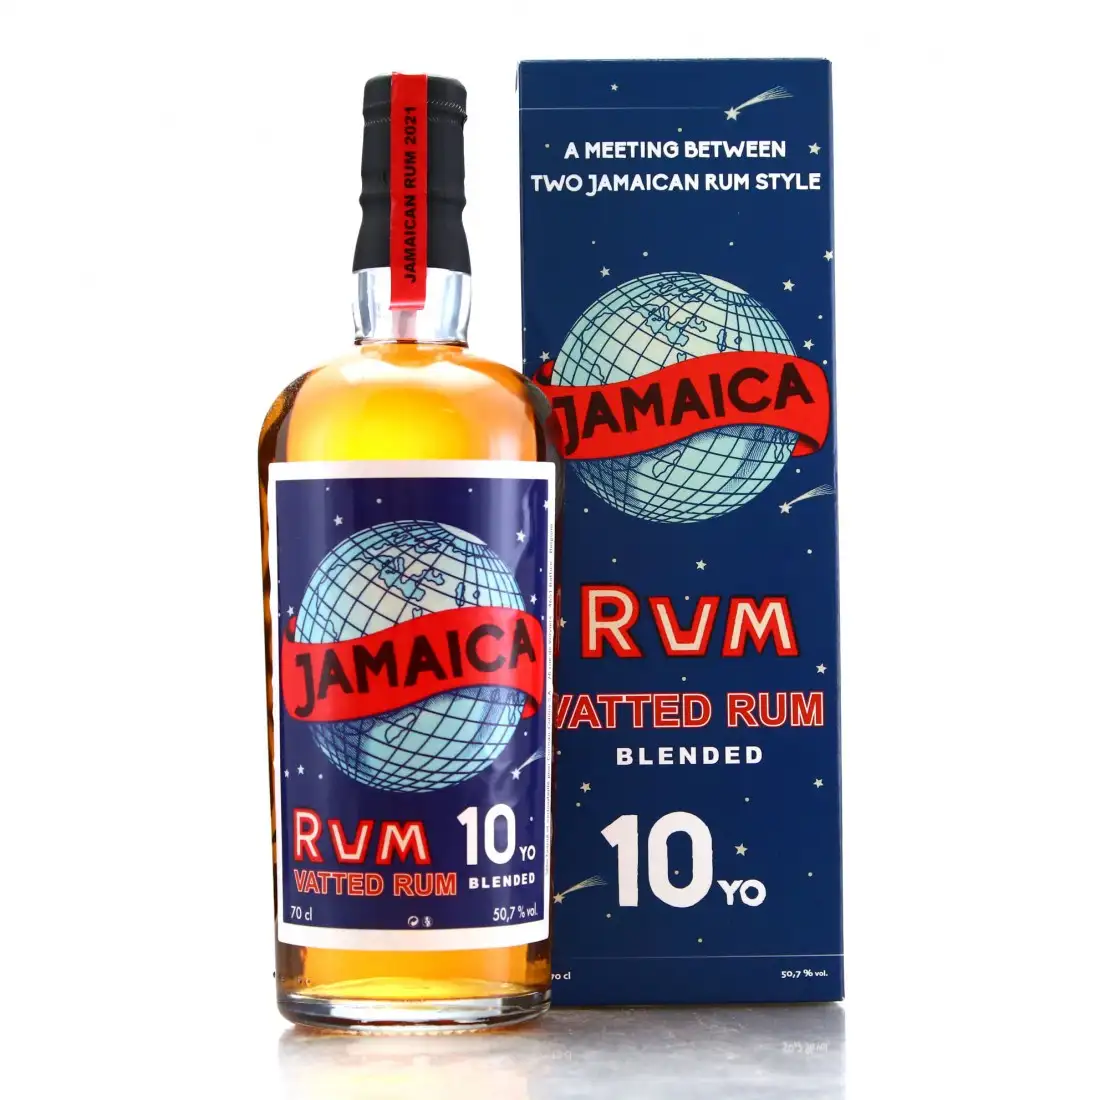 Image of the front of the bottle of the rum Jamaica Vatted Rum Blended